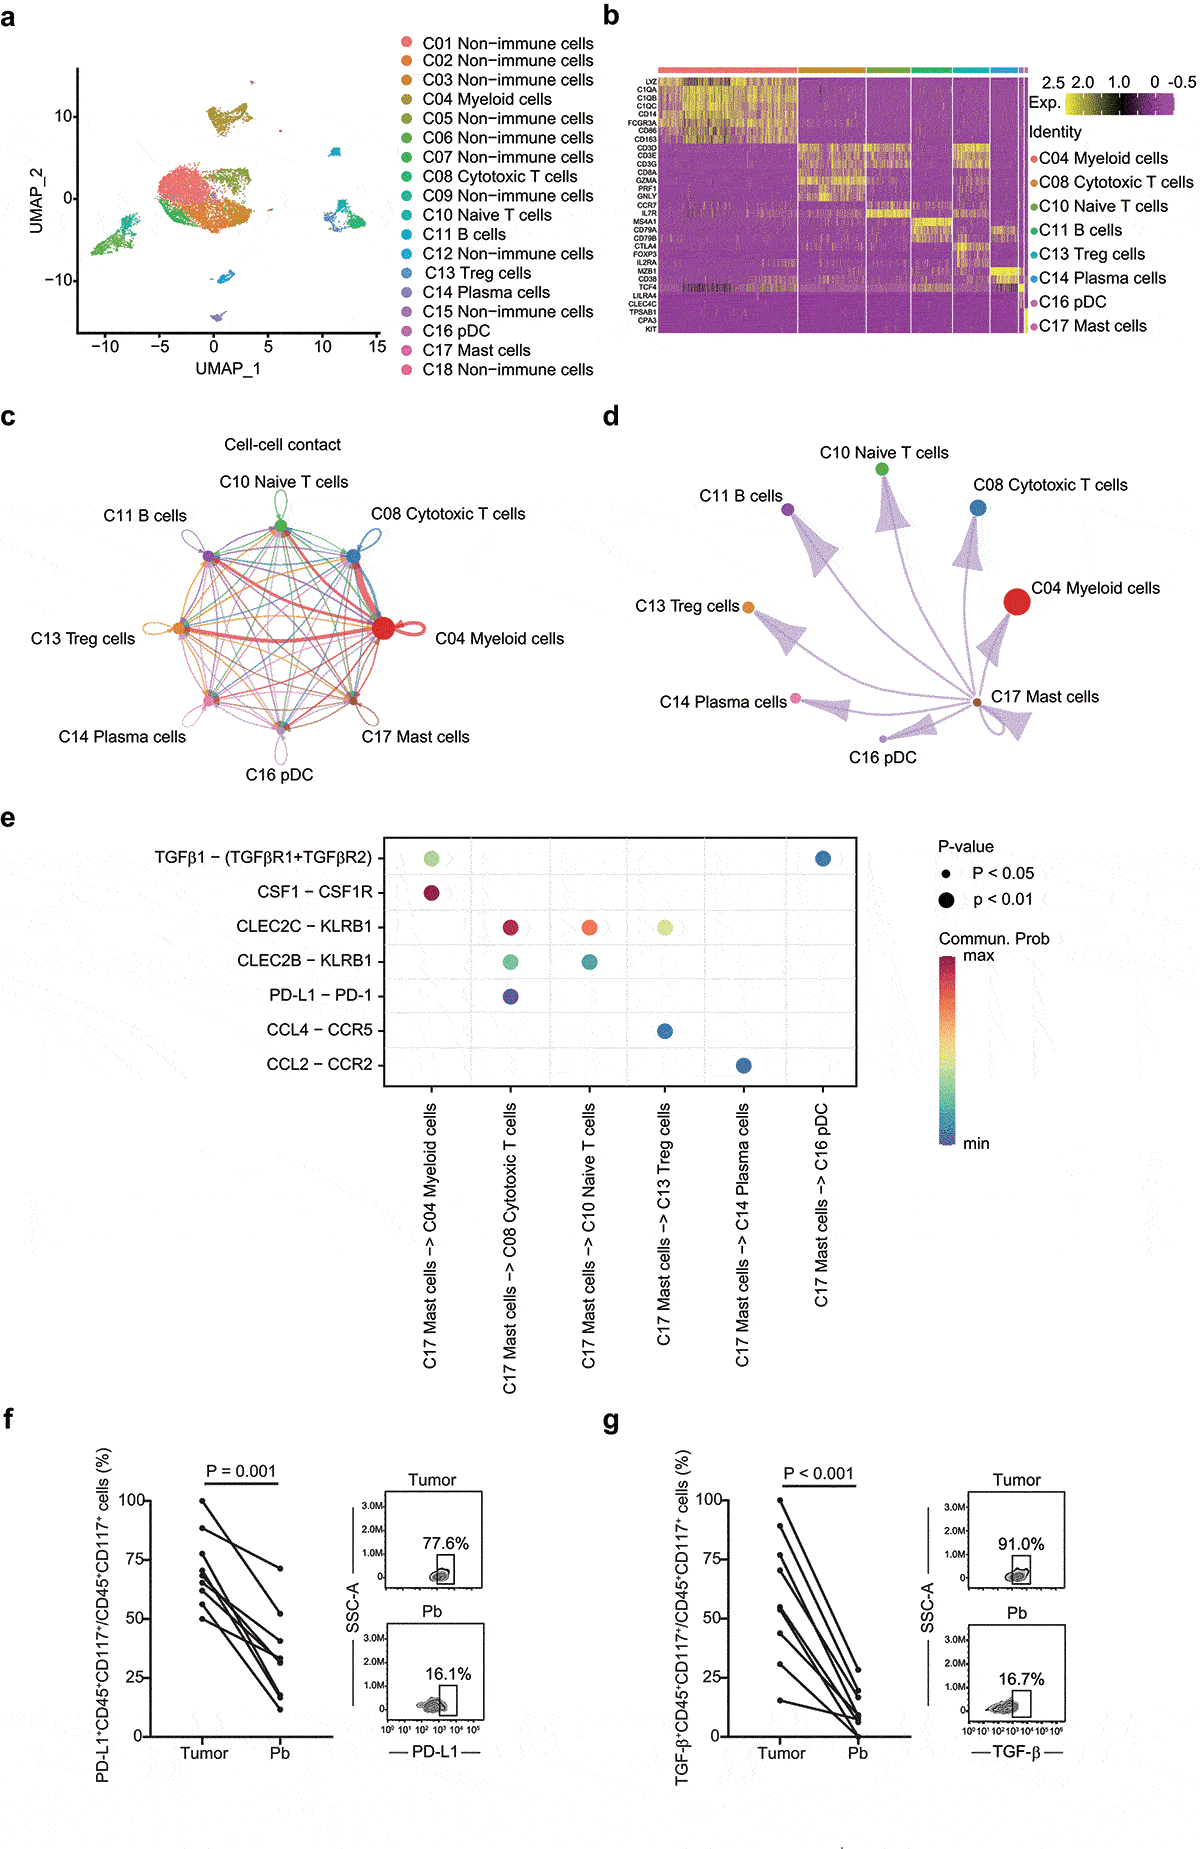 Figure 4. Integrated scRNA-seq analysis of patients with HGSOC. a UMAP plot shows the annotation and color codes for cell clusters (n = 18) in HGSOC. b Heatmap of Z-scored expression of the top canonical cell markers of each immune cell populations. The depth of color from red to yellow represents low to high expression. c Inferred interactions of immune cells. The arrow width is the sum of interaction values between two clusters. L-R pairs with a value >10 and P < .05 are shown. d Inferred interactions between mast cells and other immune cells. The arrow width is the sum of interaction values between two clusters. L-R pairs with a value >10 and P < .05 are shown. e Bubble plot shows selected L-R pairs between mast cells and other immune cells. The depth of color from blue to red represents low to high communication probability. The size of the bubble represents corresponding P values. Commun. Prob, communication probability. f Dot plot illustrates the fraction of PD-L1+ Mast cells, in 9 matched tissue and blood samples. Two dimensional FACs plots shows PD-L1+ mast cells from HGSOC tumor tissue (top right panel) and peripheral blood (down right panel). Pb, peripheral blood. g Dot plot illustrates the fraction of TGF-β+ Mast cells, in 9 matched tissue and blood samples. Two dimensional FACs plots shows TGF-β+ mast cells from HGSOC tumor tissue (top right panel) and peripheral blood (down right panel). Pb, peripheral blood